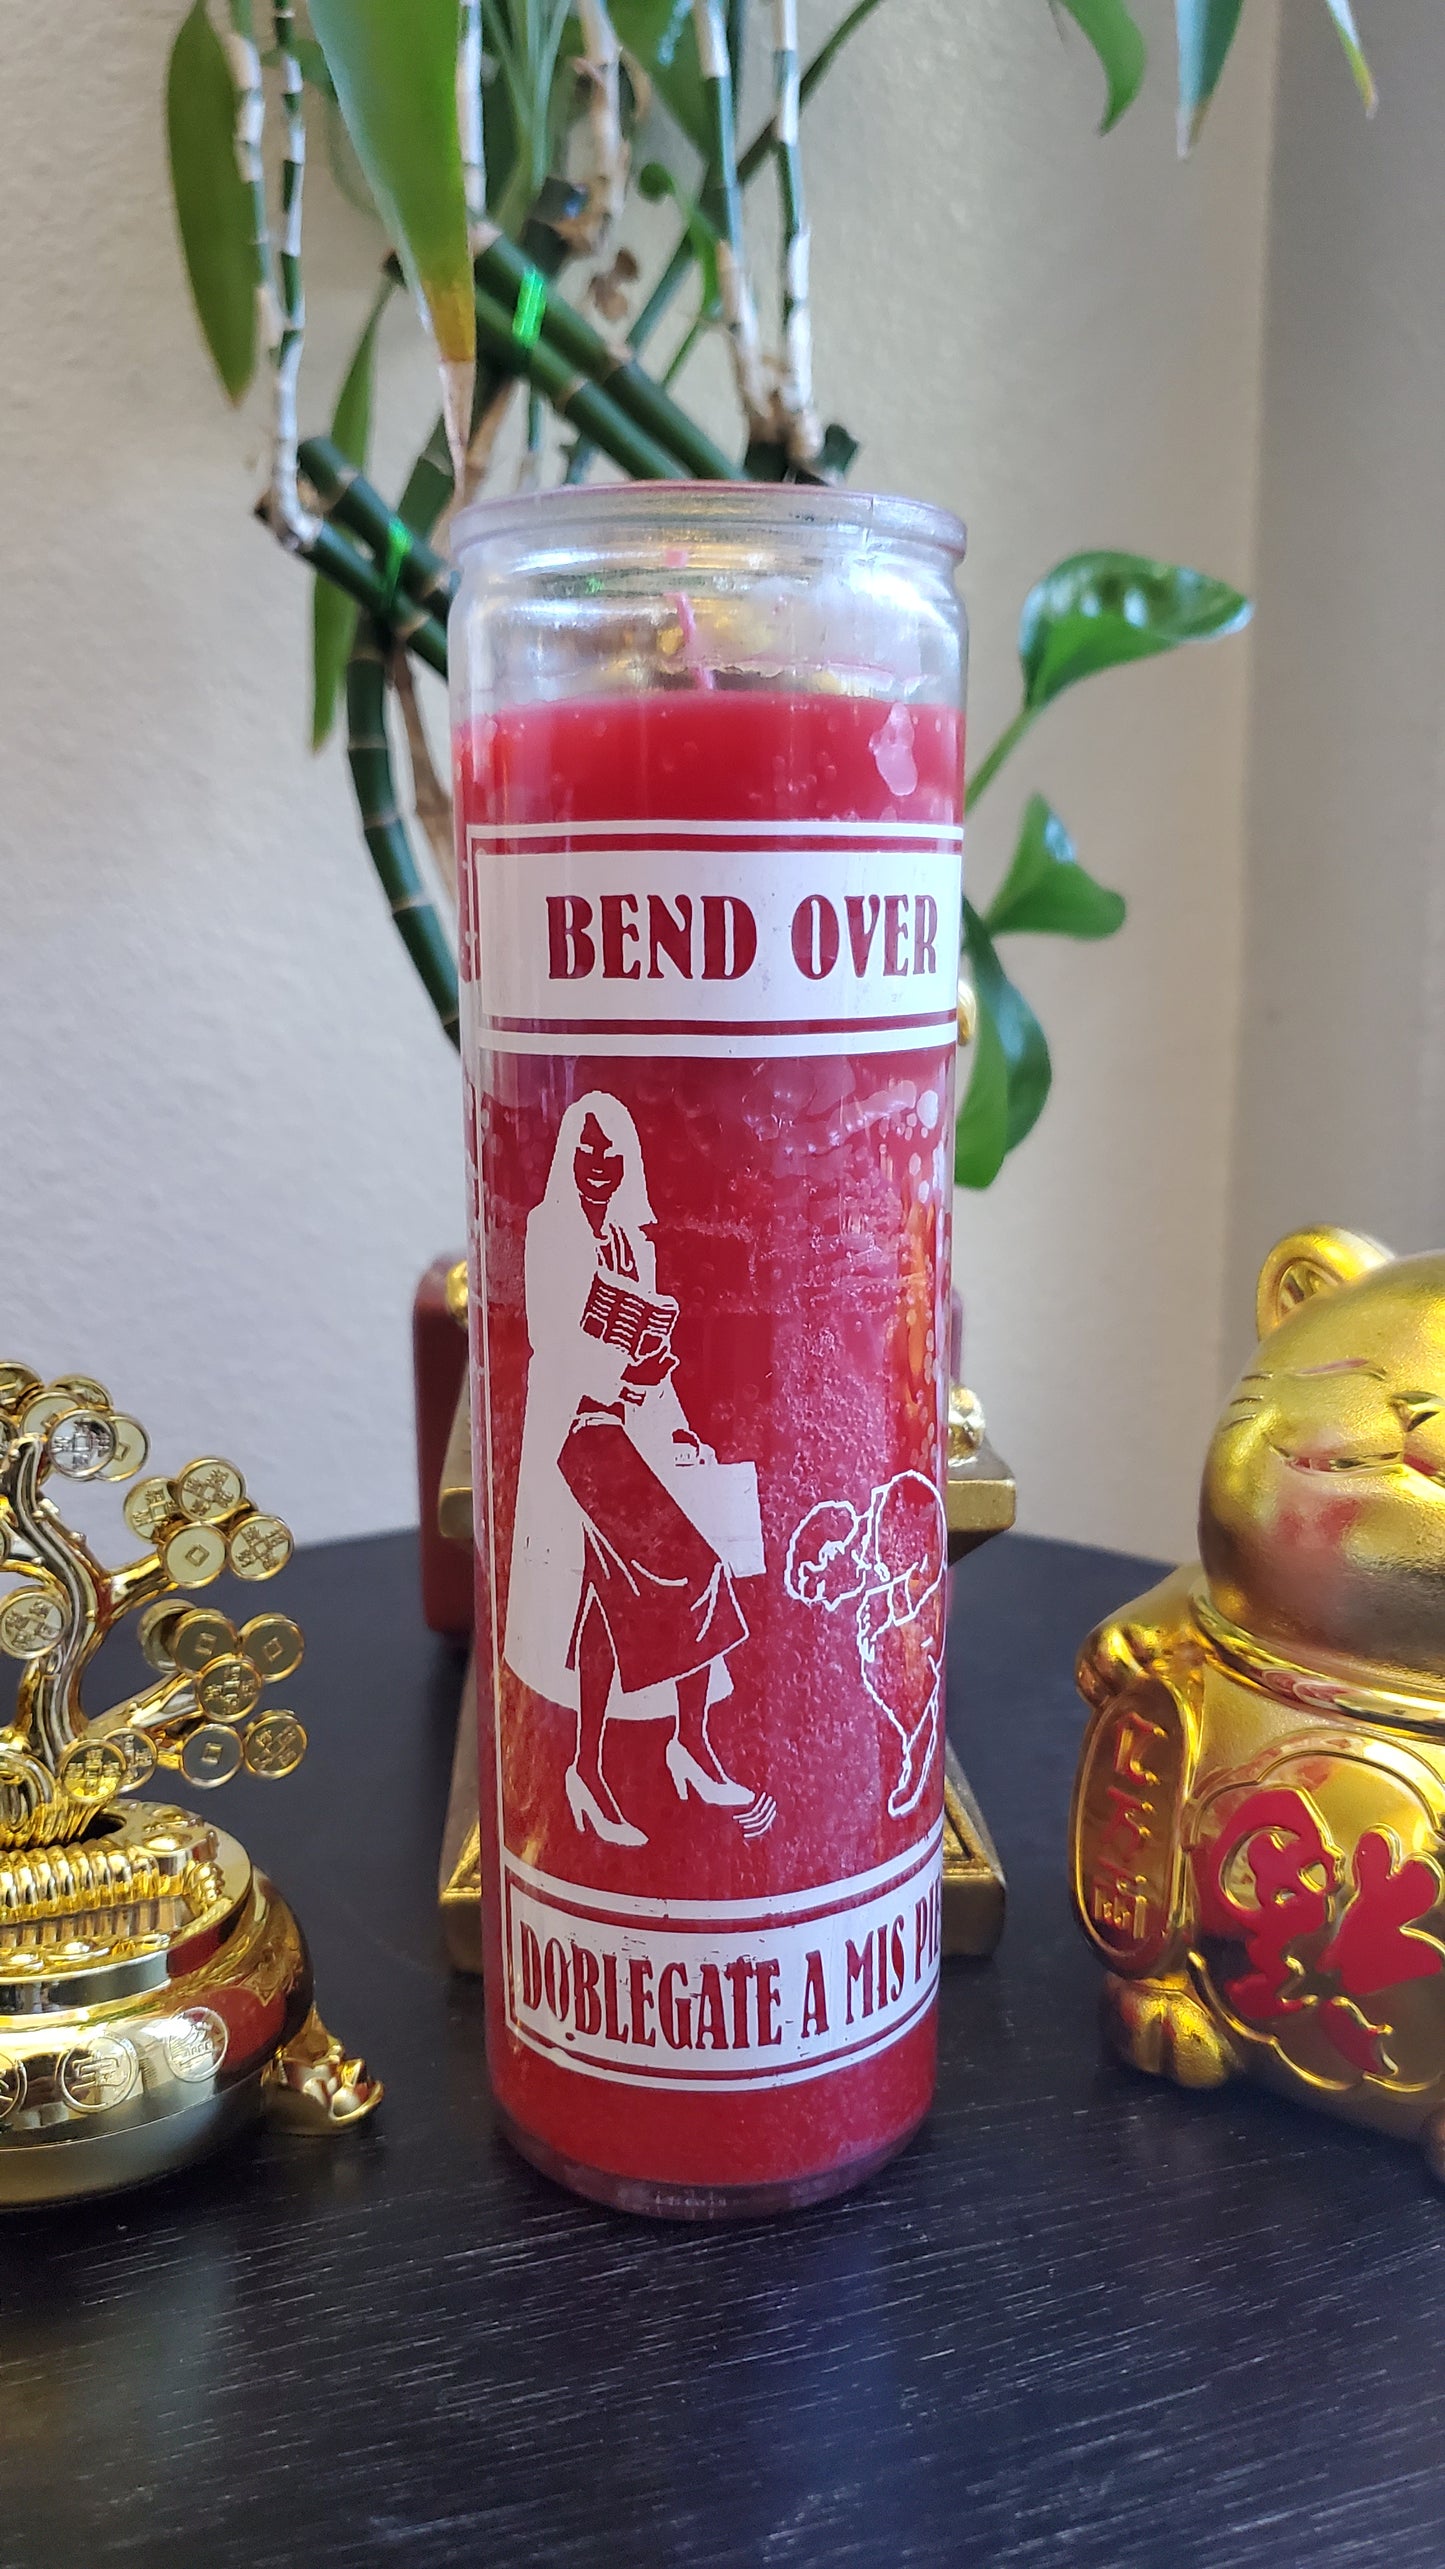 Red "Bend Over" **7 Day Domination Magick Candle** #SpellCandles #RootWork #Conjure #Domination